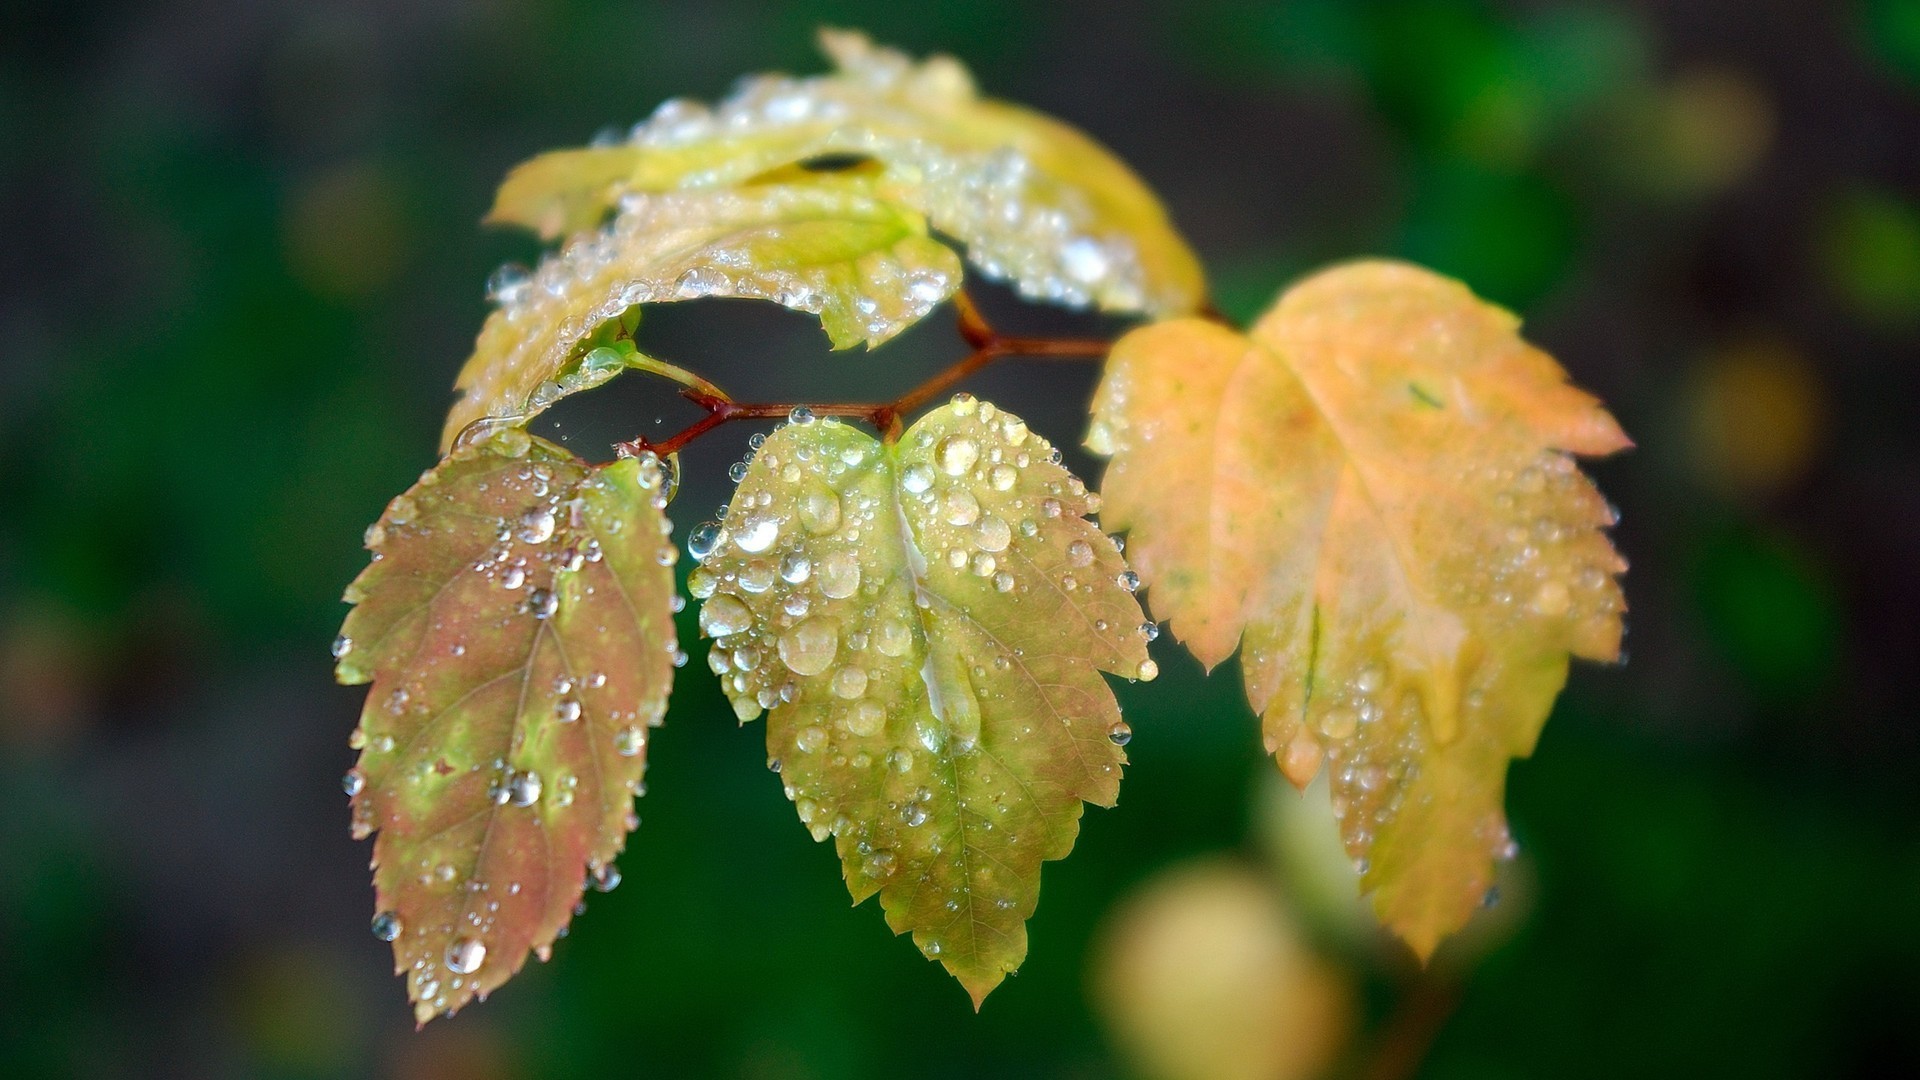 Moisture on the leaves of birch branches wallpapers and images